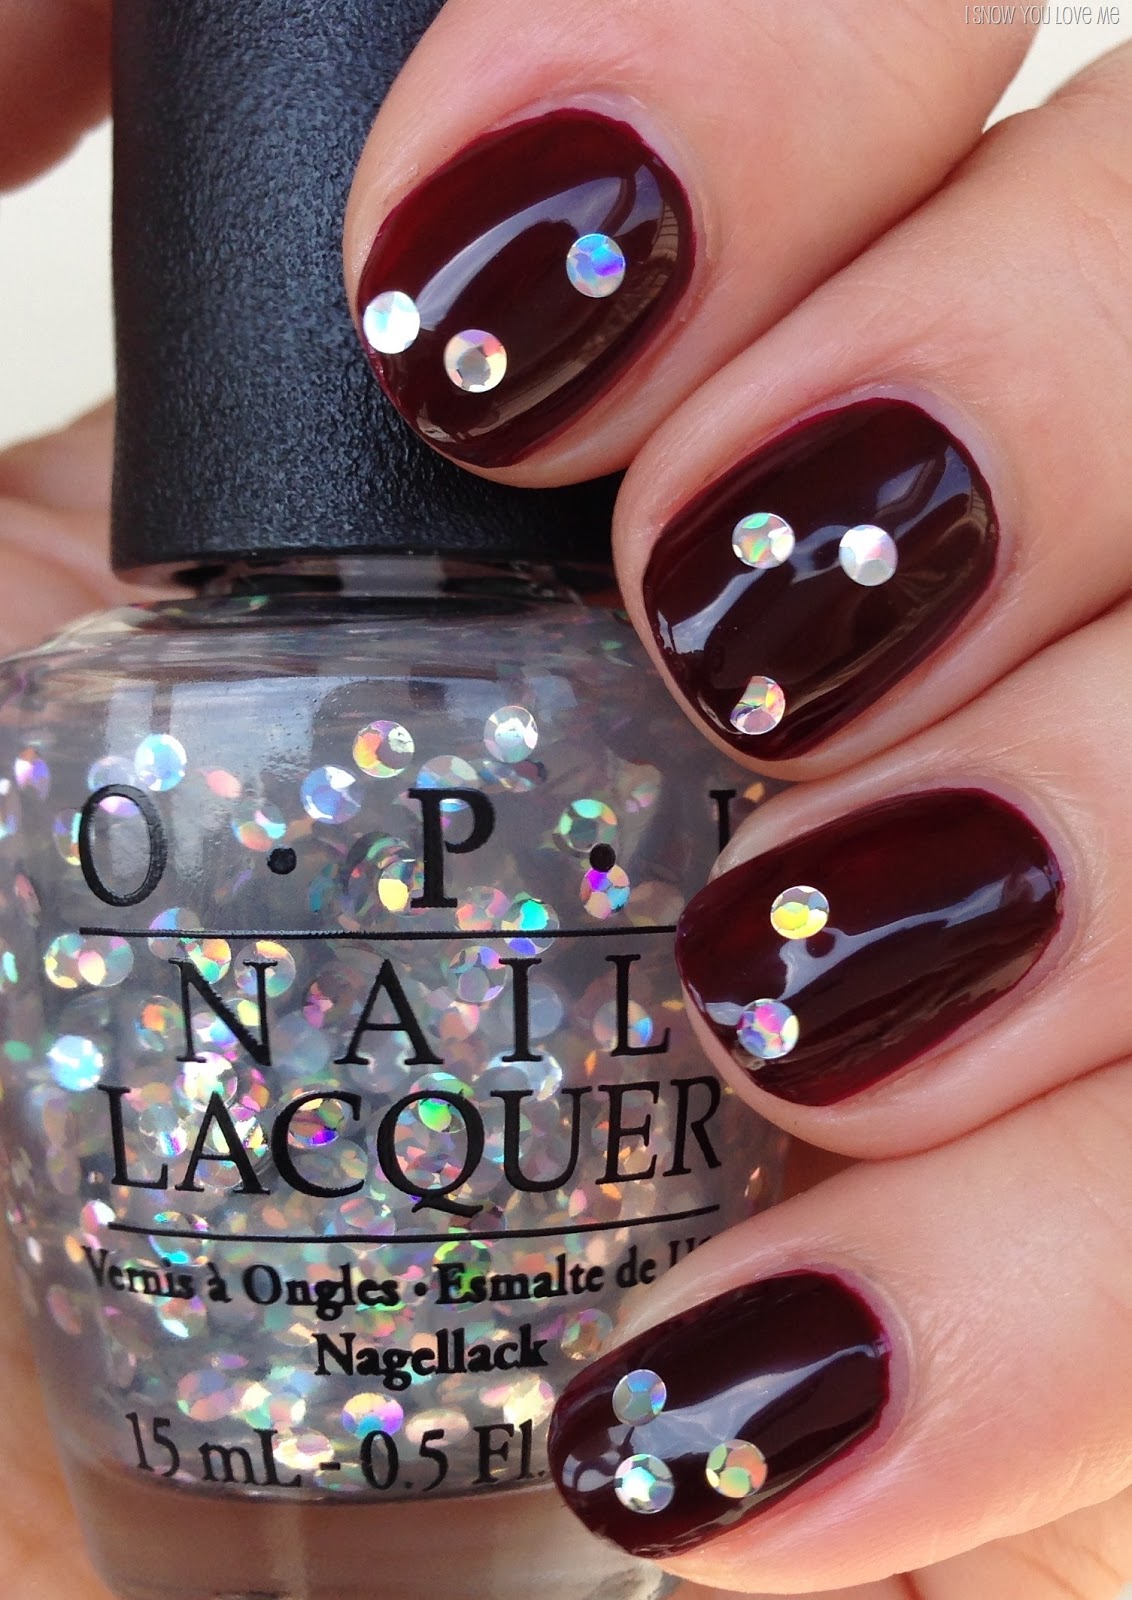 [OPI%2520I%2520Snow%2520You%2520Love%2520Me%2520%2528over%2520Visions%2520of%2520Love%2529%2520%25282%2529%255B6%255D.jpg]